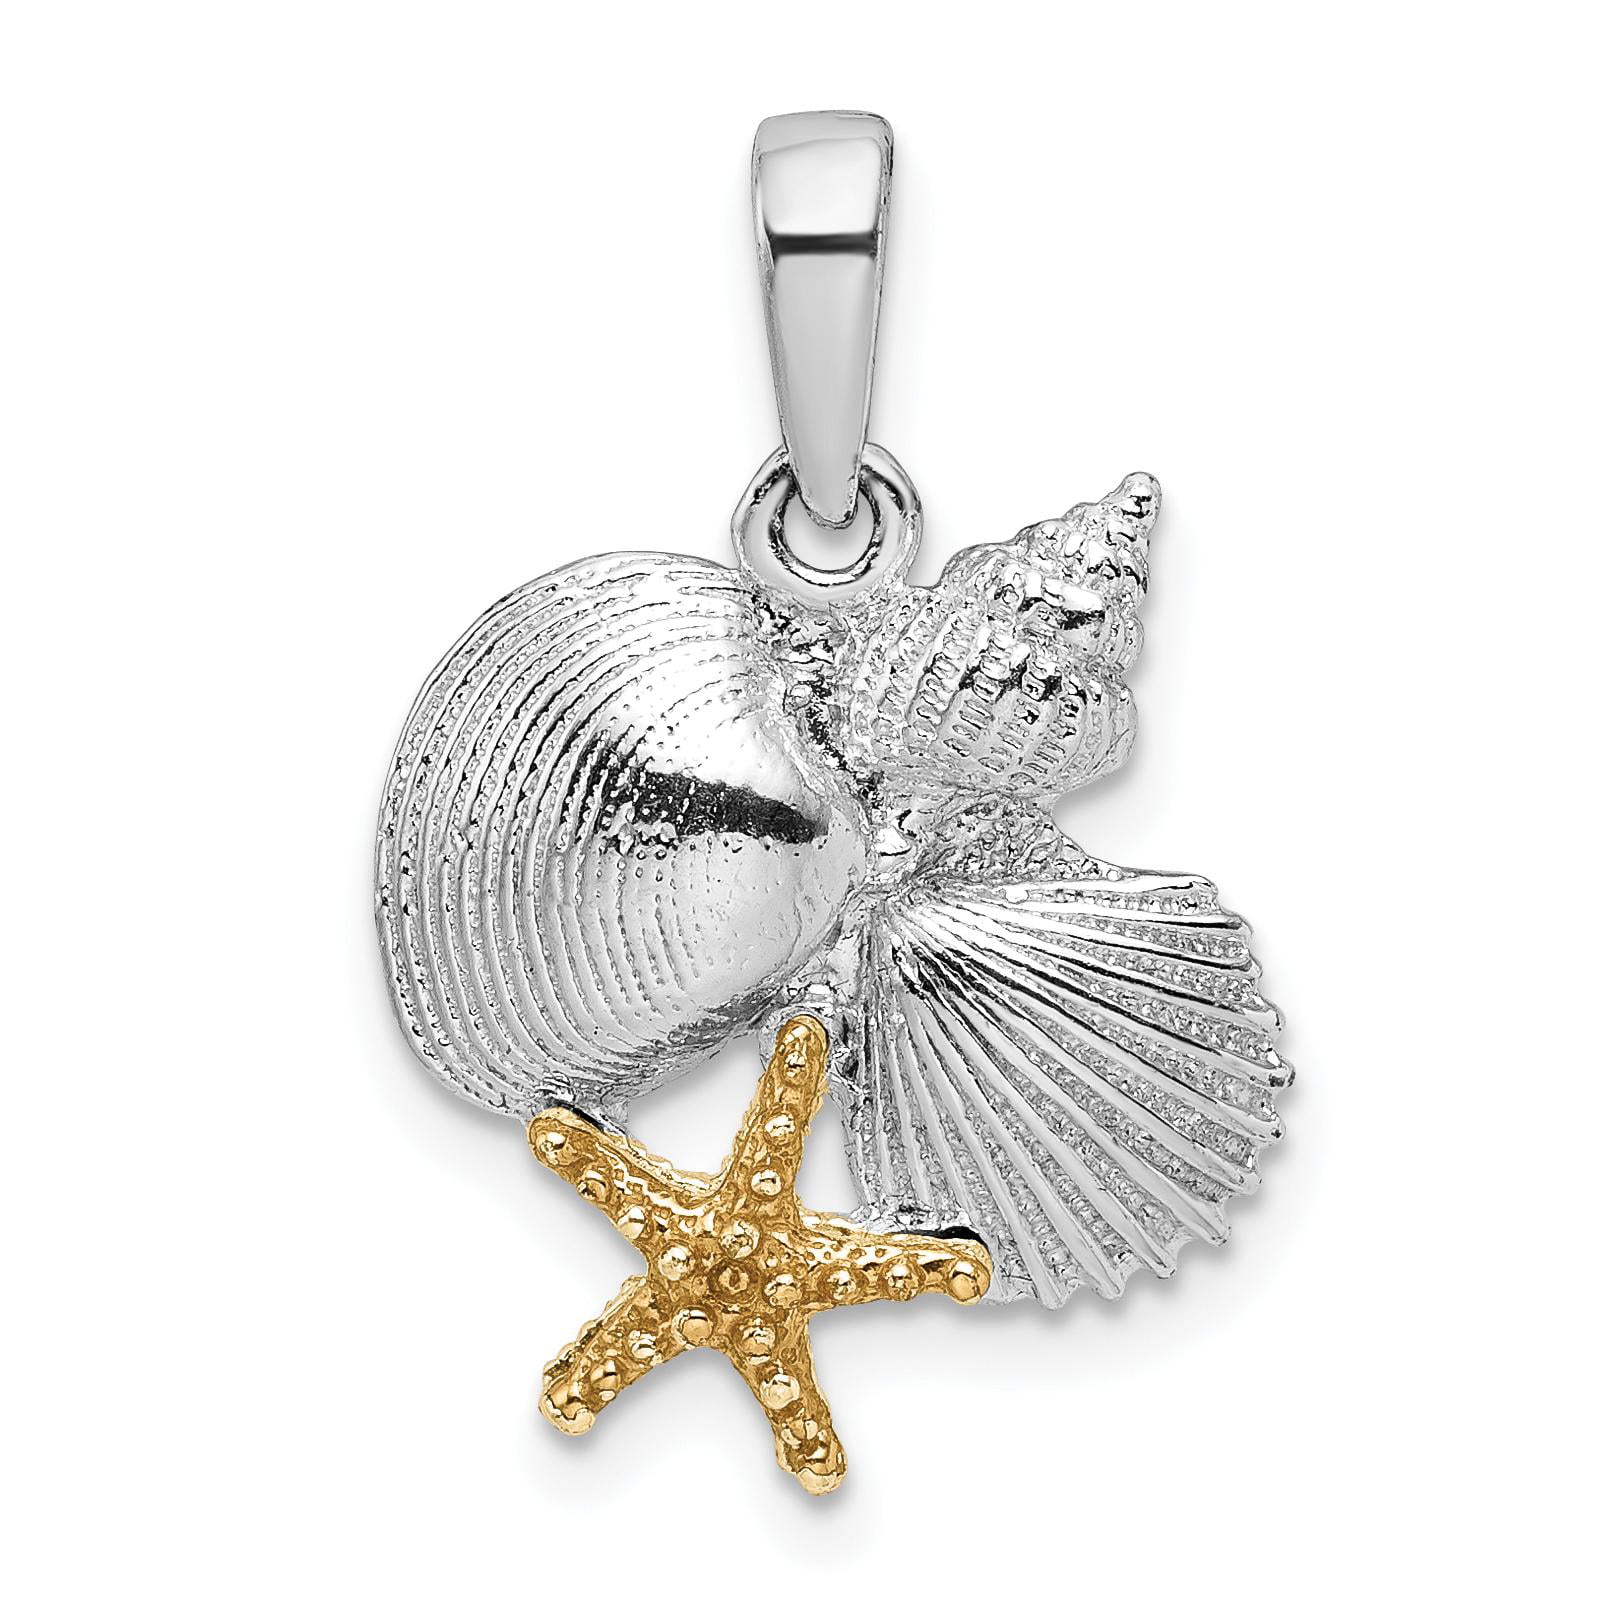 Starfish with Beaded Texture 925 Sterling Silver Nautical Charm Pendant 